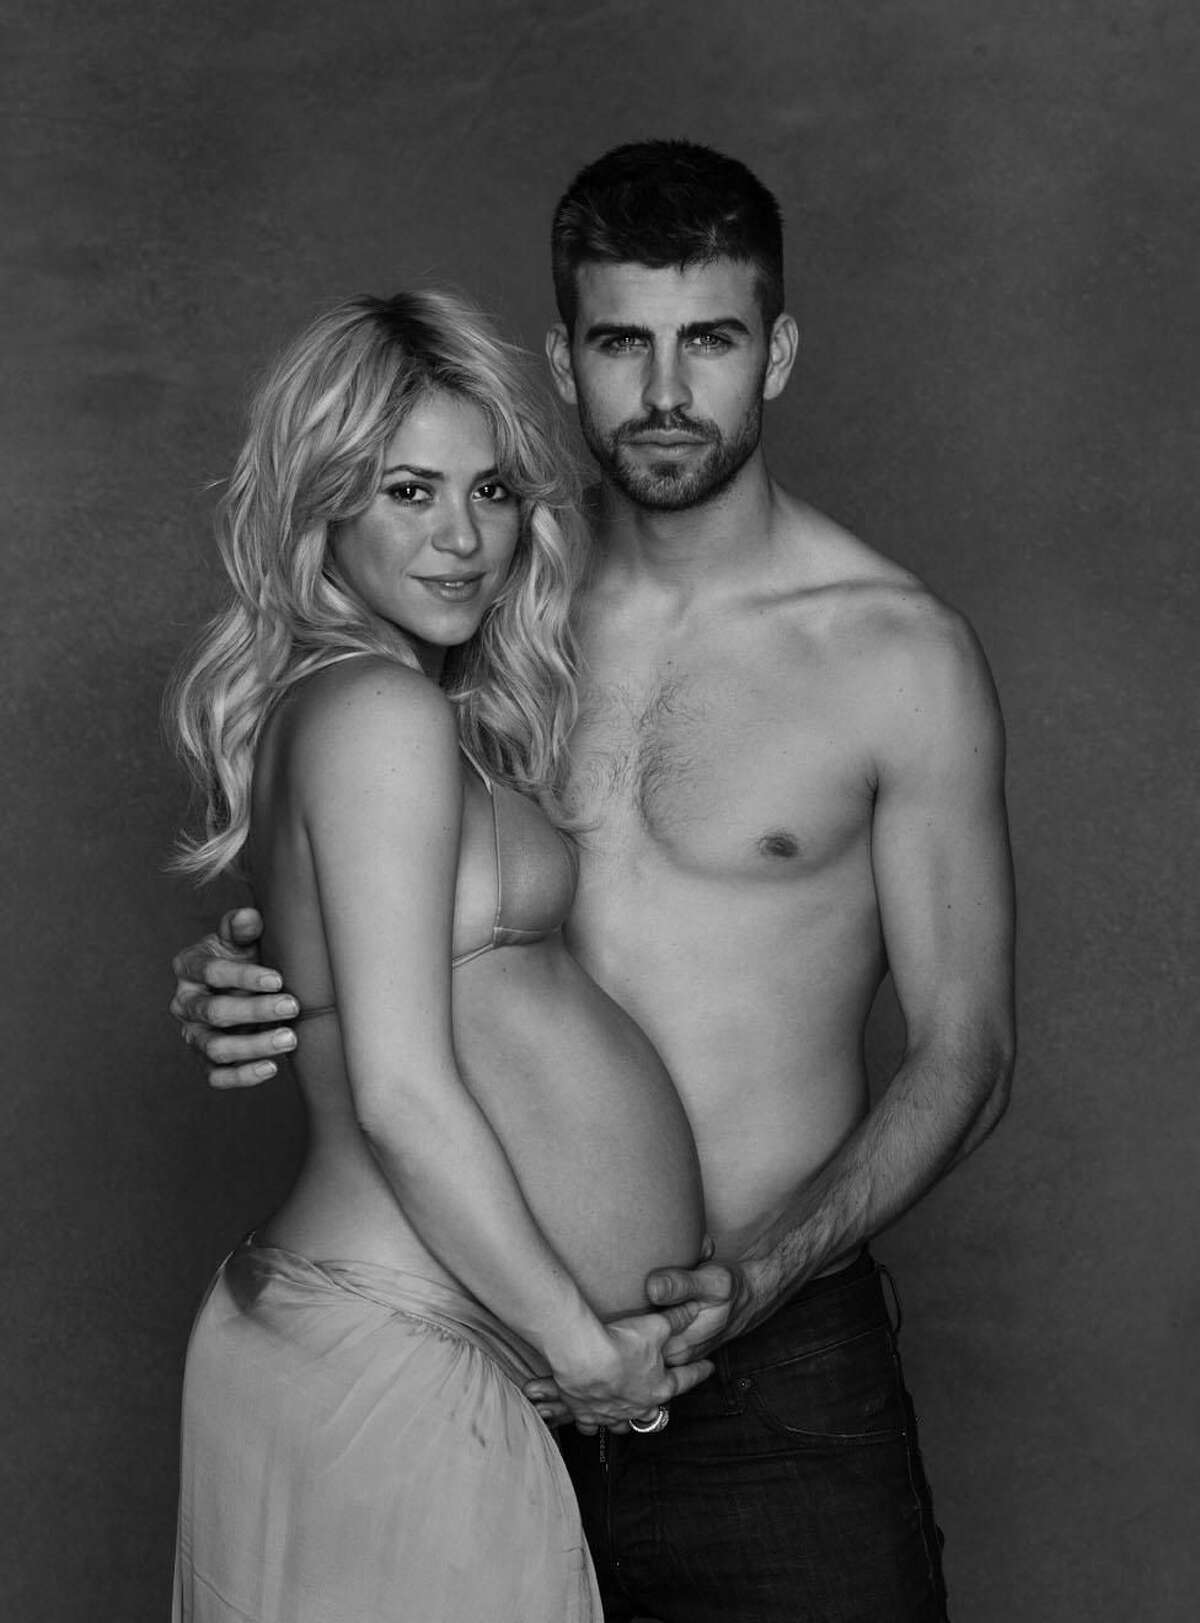 In this undated photo provided by UNICEF, Columbian born singer Shakira poses while pregnant with Spanish soccer player Gerard Piqué.(AP Photo)